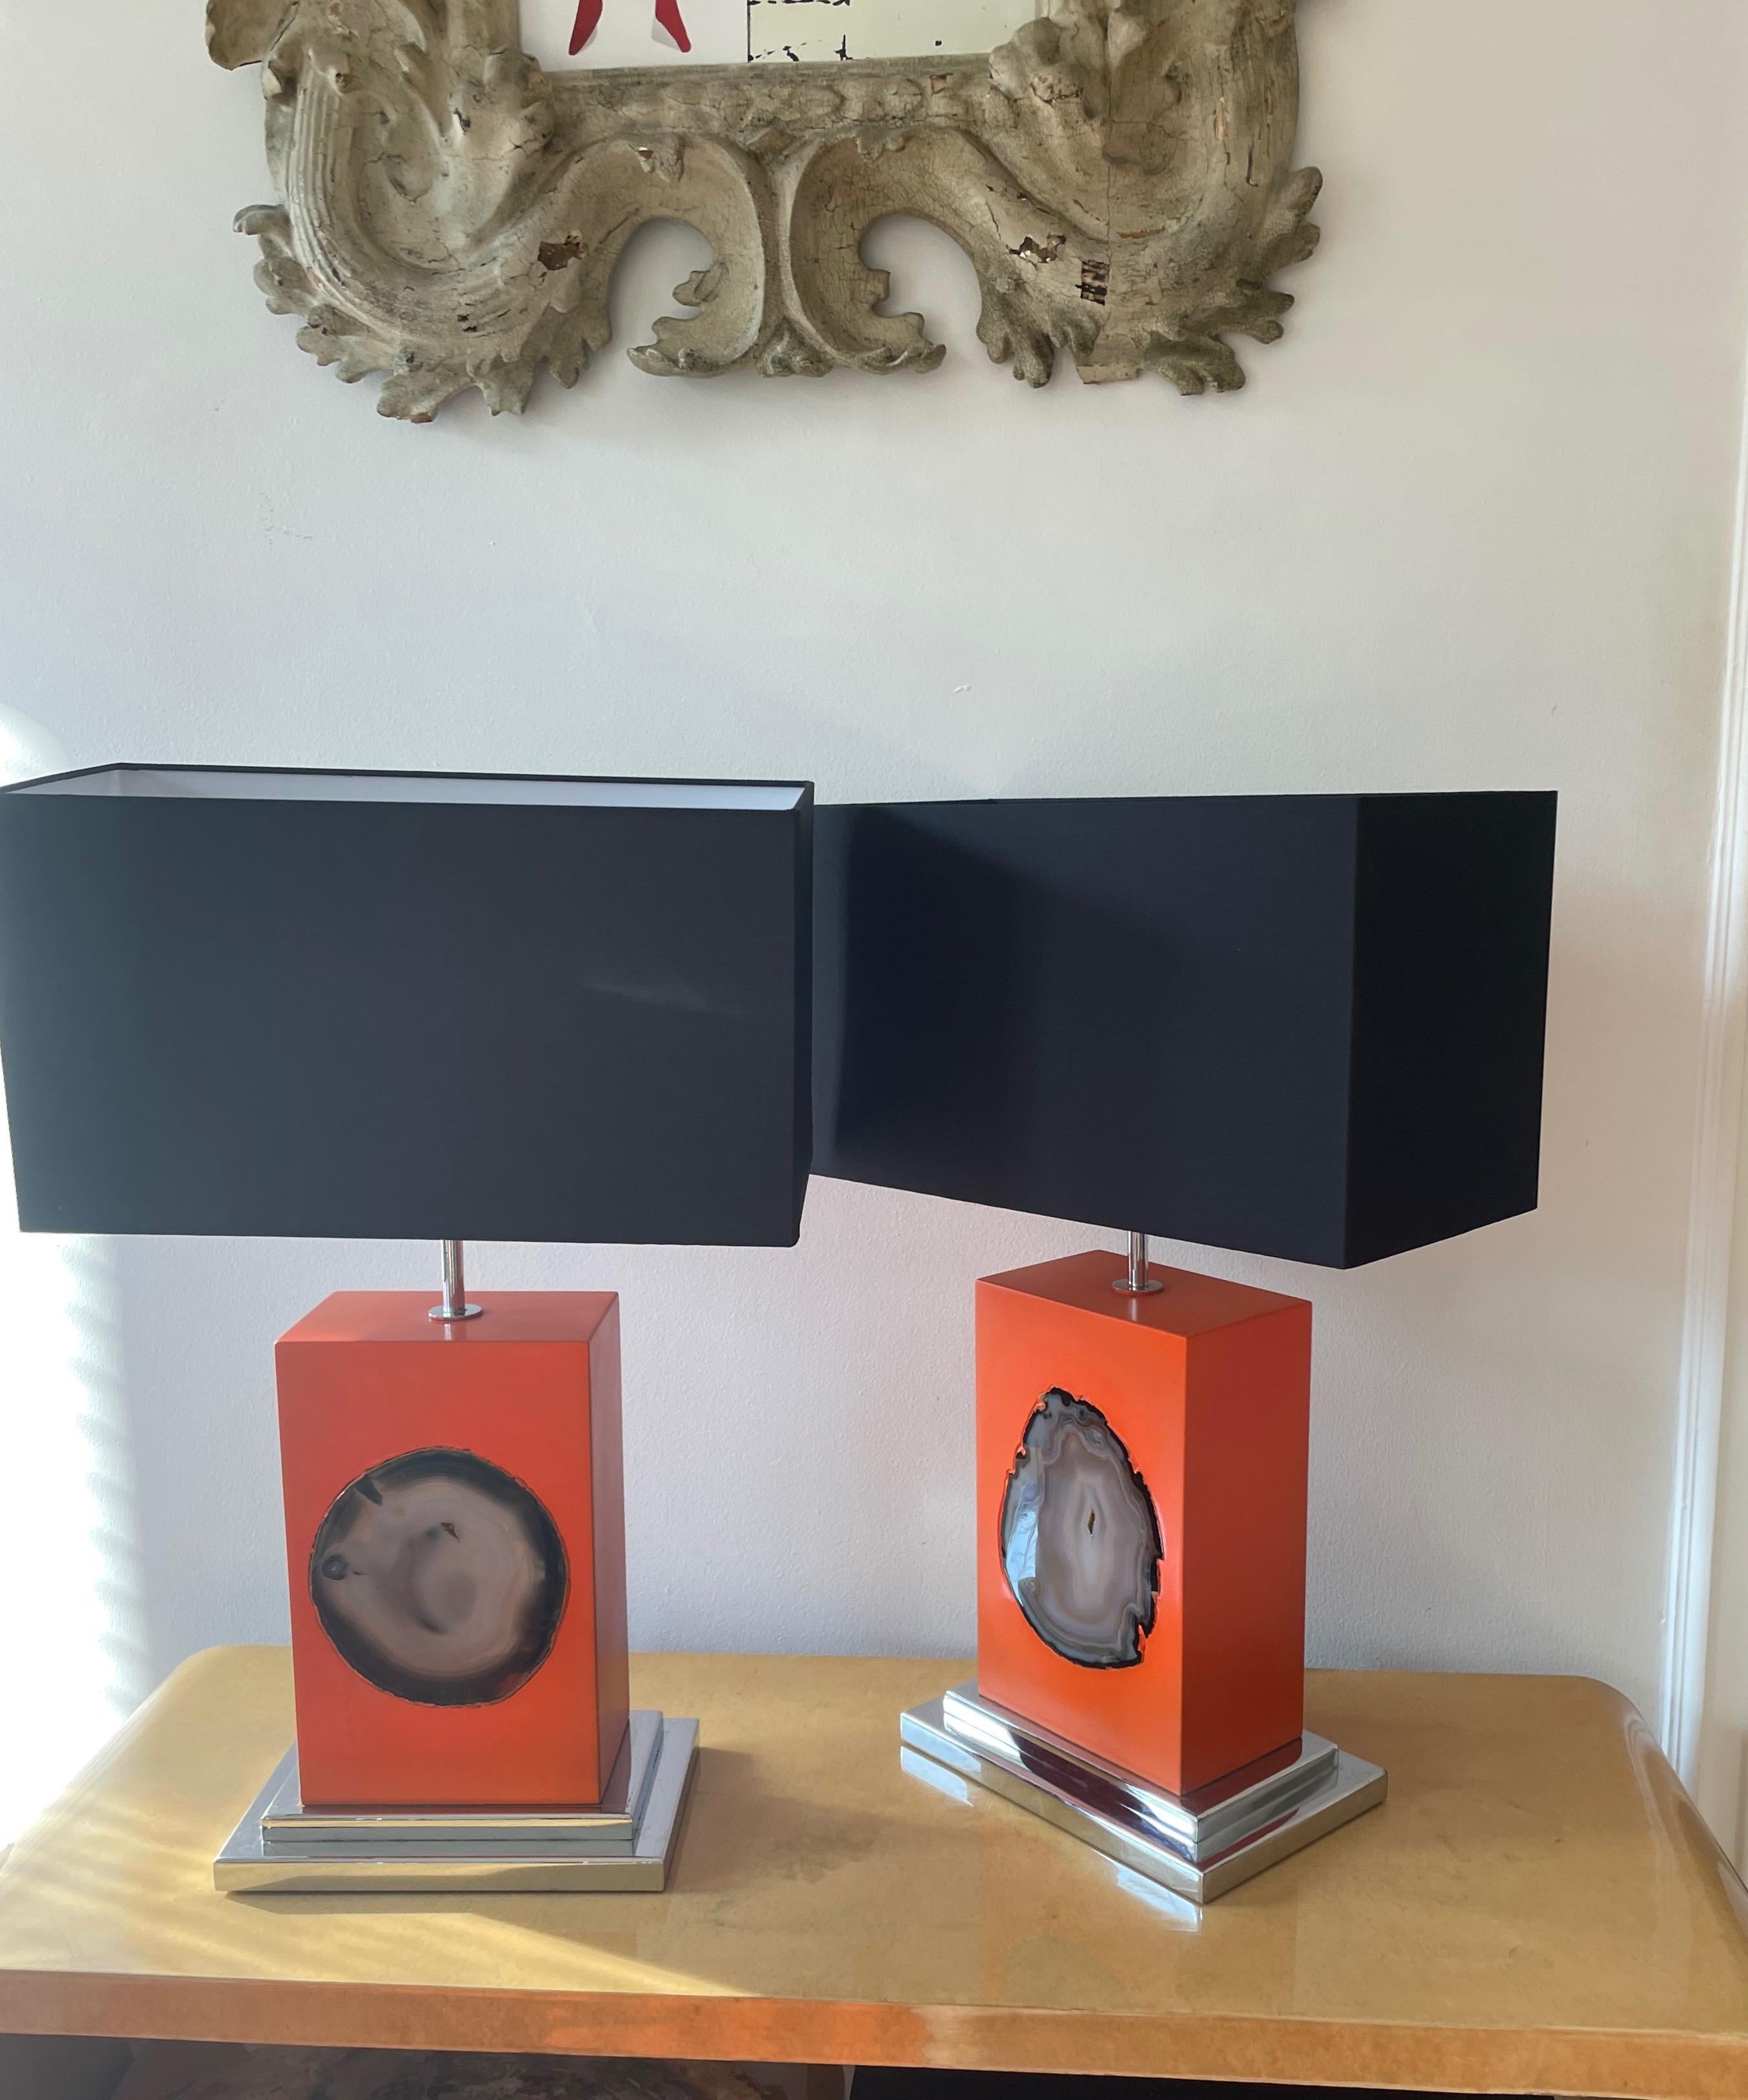 Elegant pair of table lamps, chromed metal mounting.
Shows two different agate slices on a orange wood base.
Rewired recently.Excellent vintage condition.
Comes with two black rectangular lampshades.
France 1980.